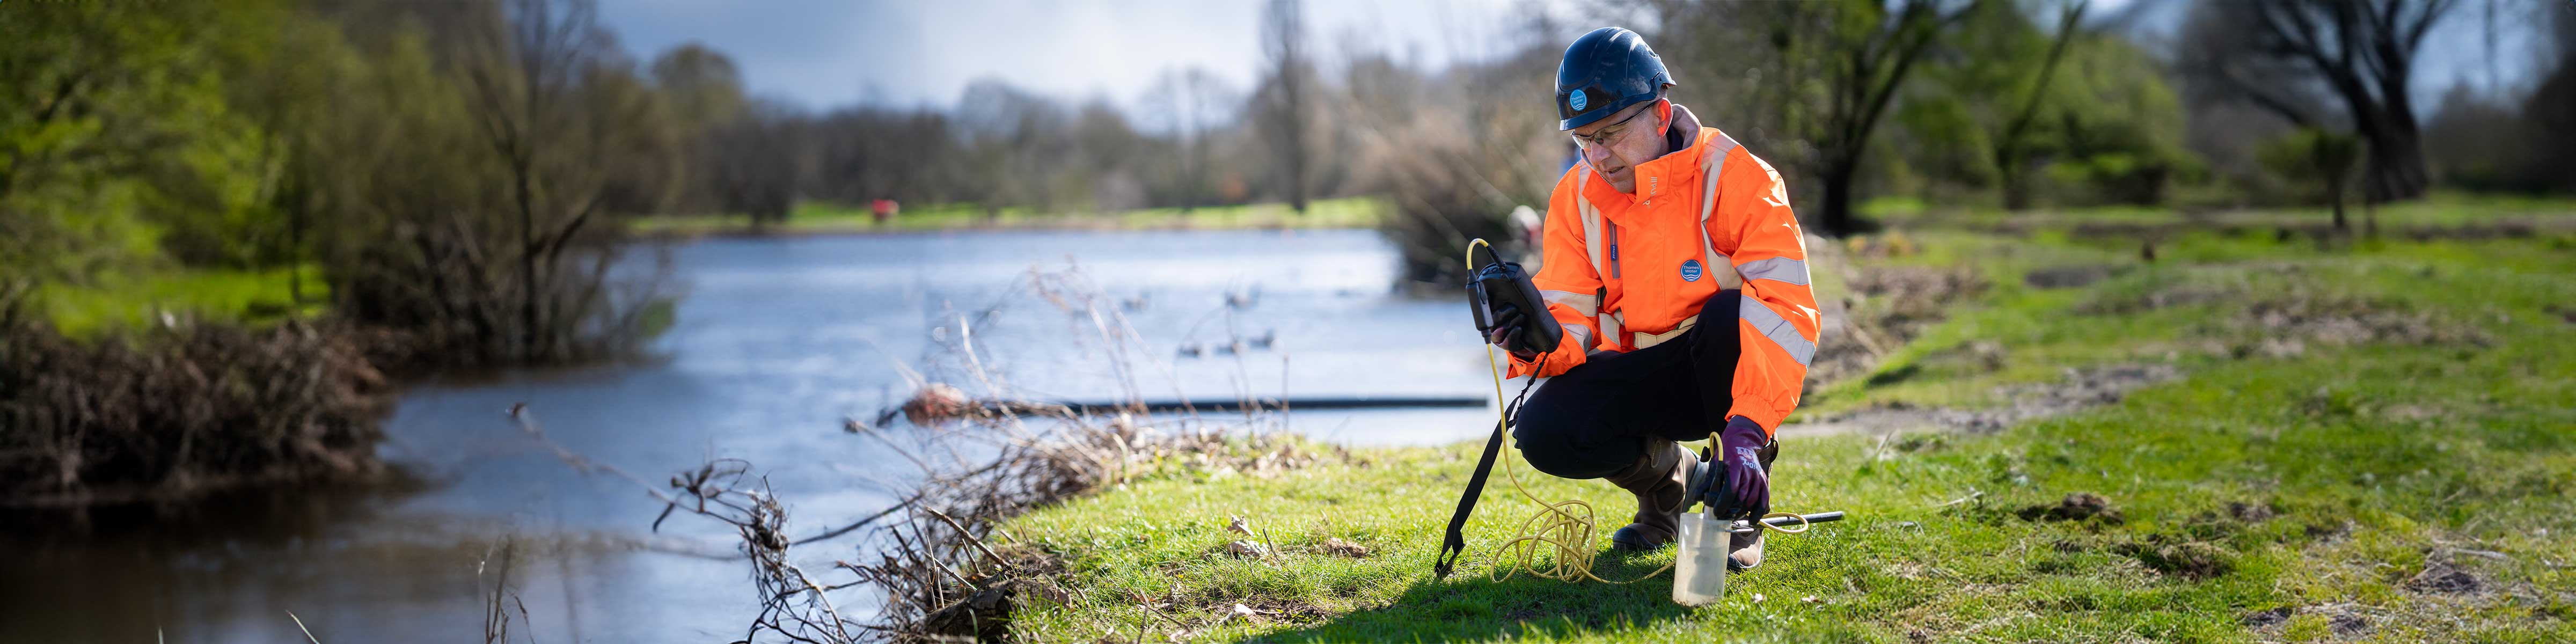 A Thames worker taking a water sample by a river